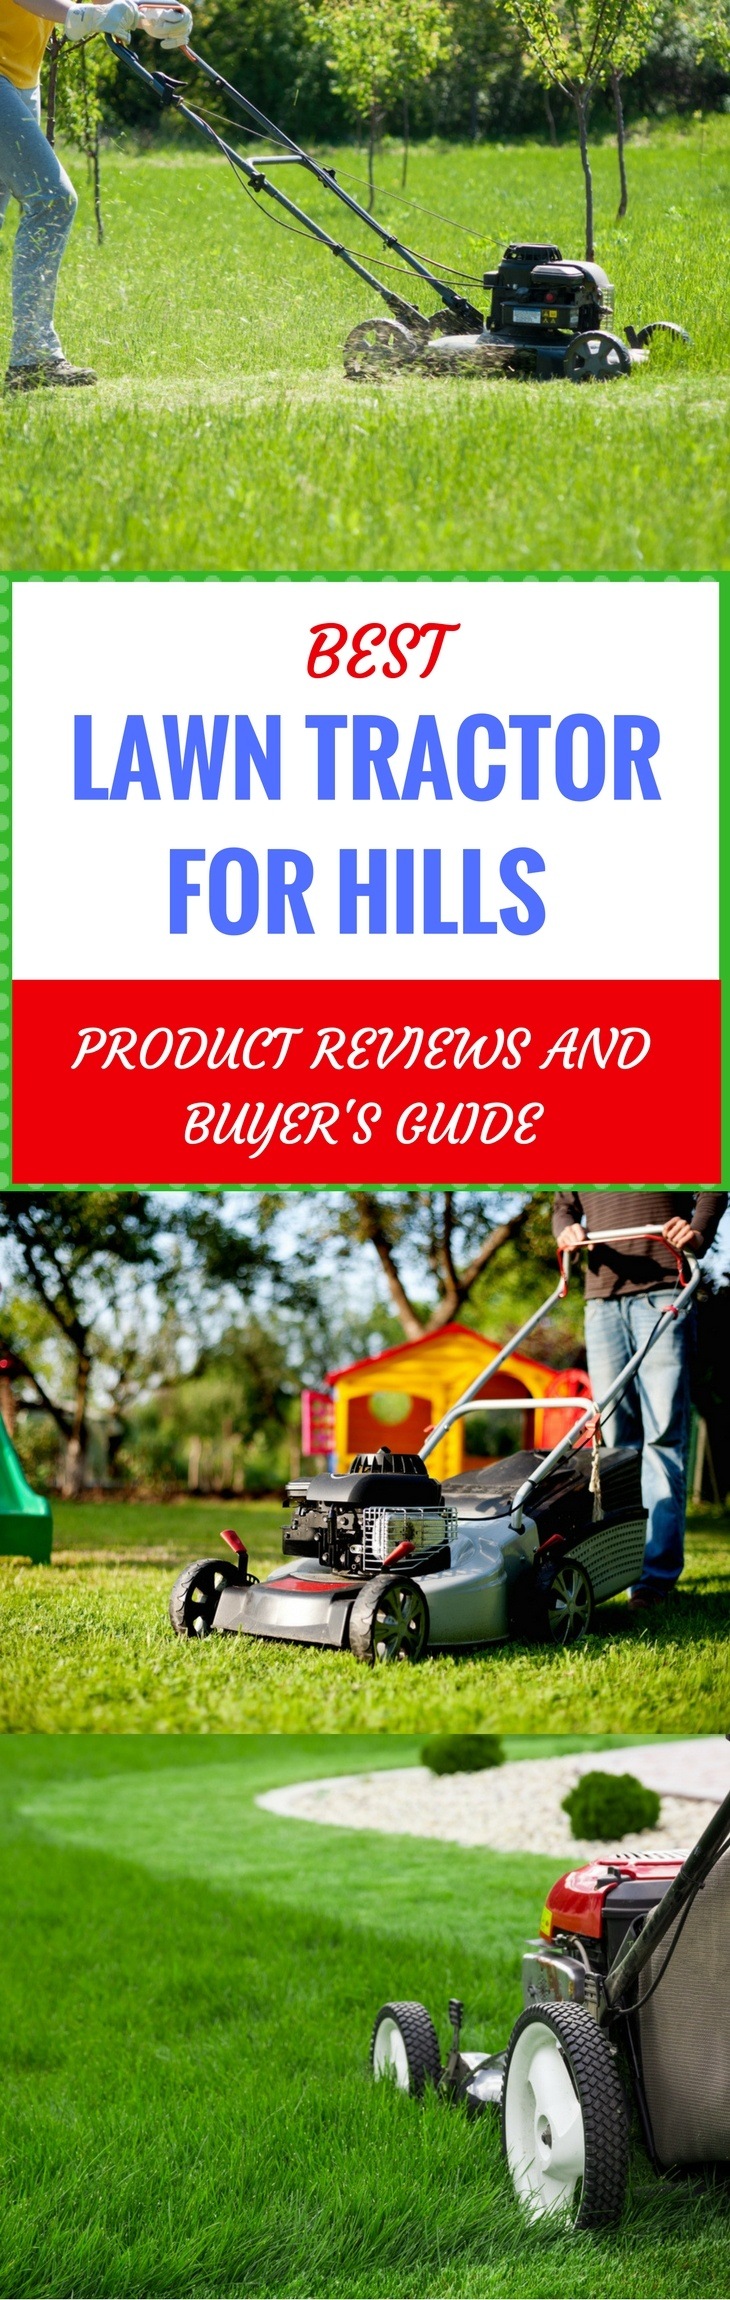 best lawn tractor for hills pin it